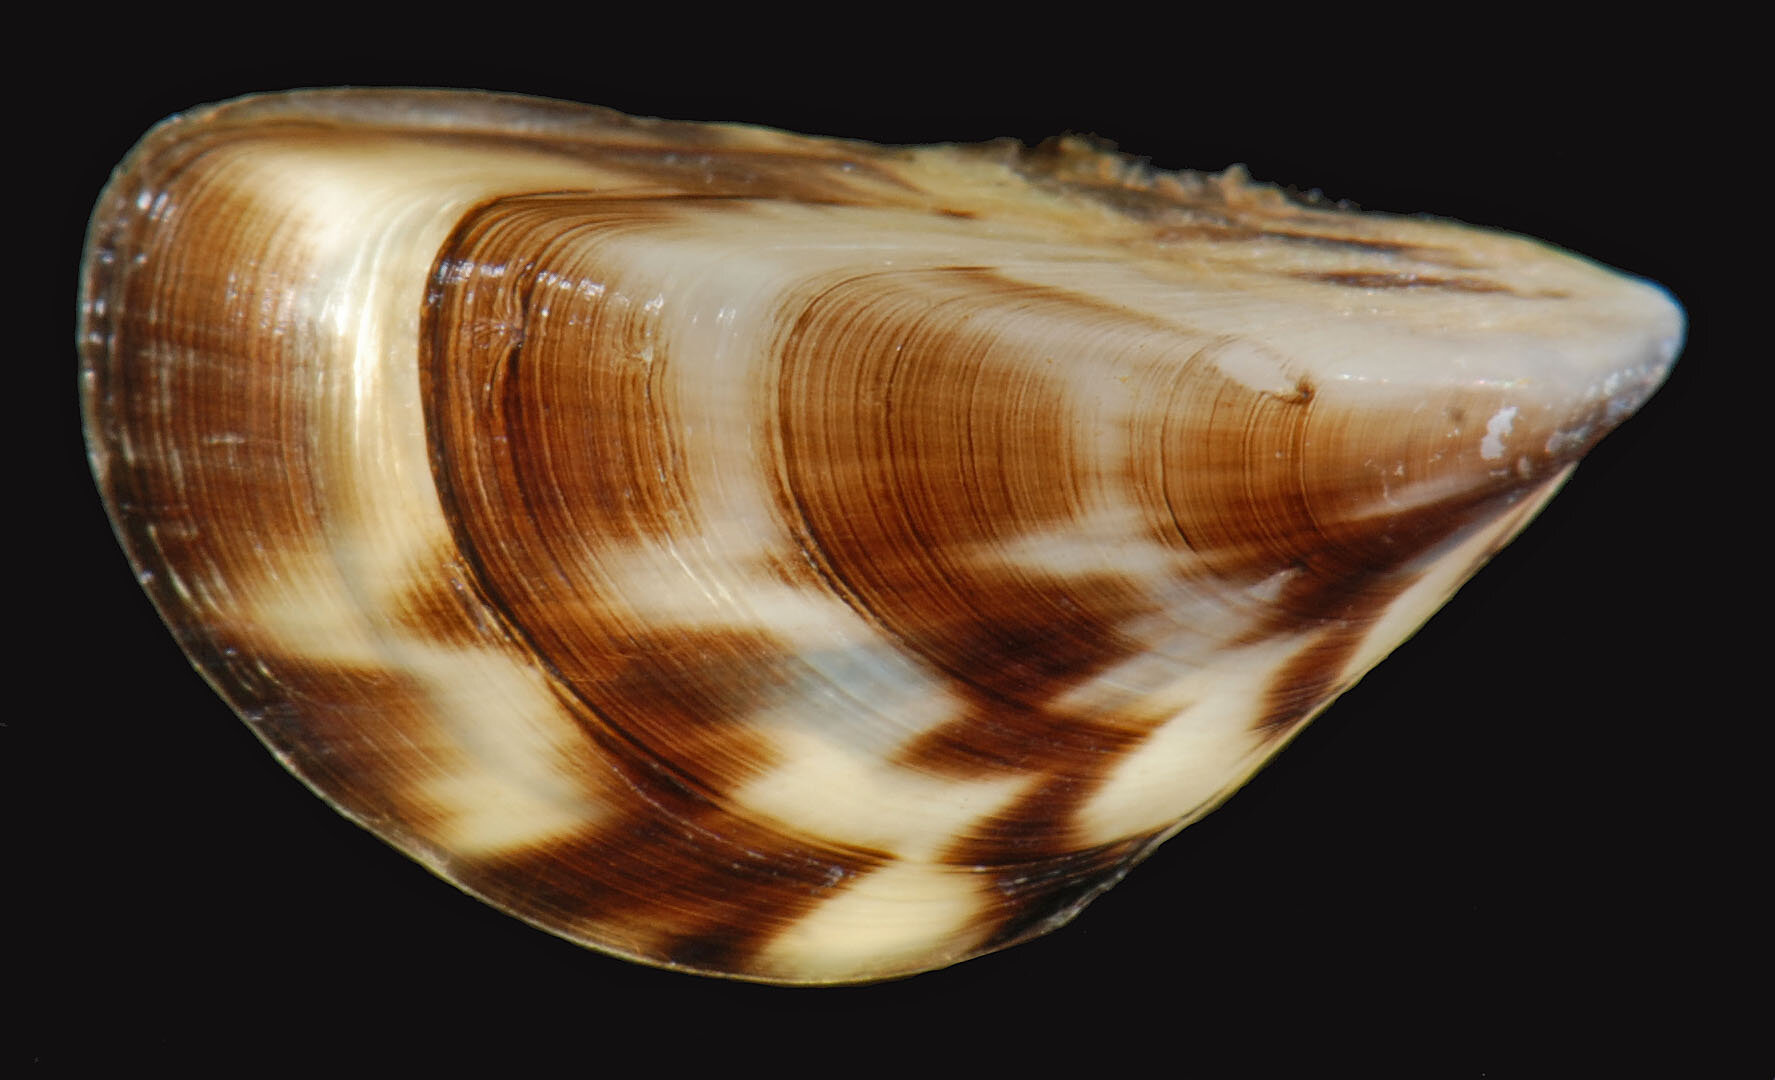 New insights into Zebra mussel attachment fibers offer potential solutions to combat invasive species - Phys.org